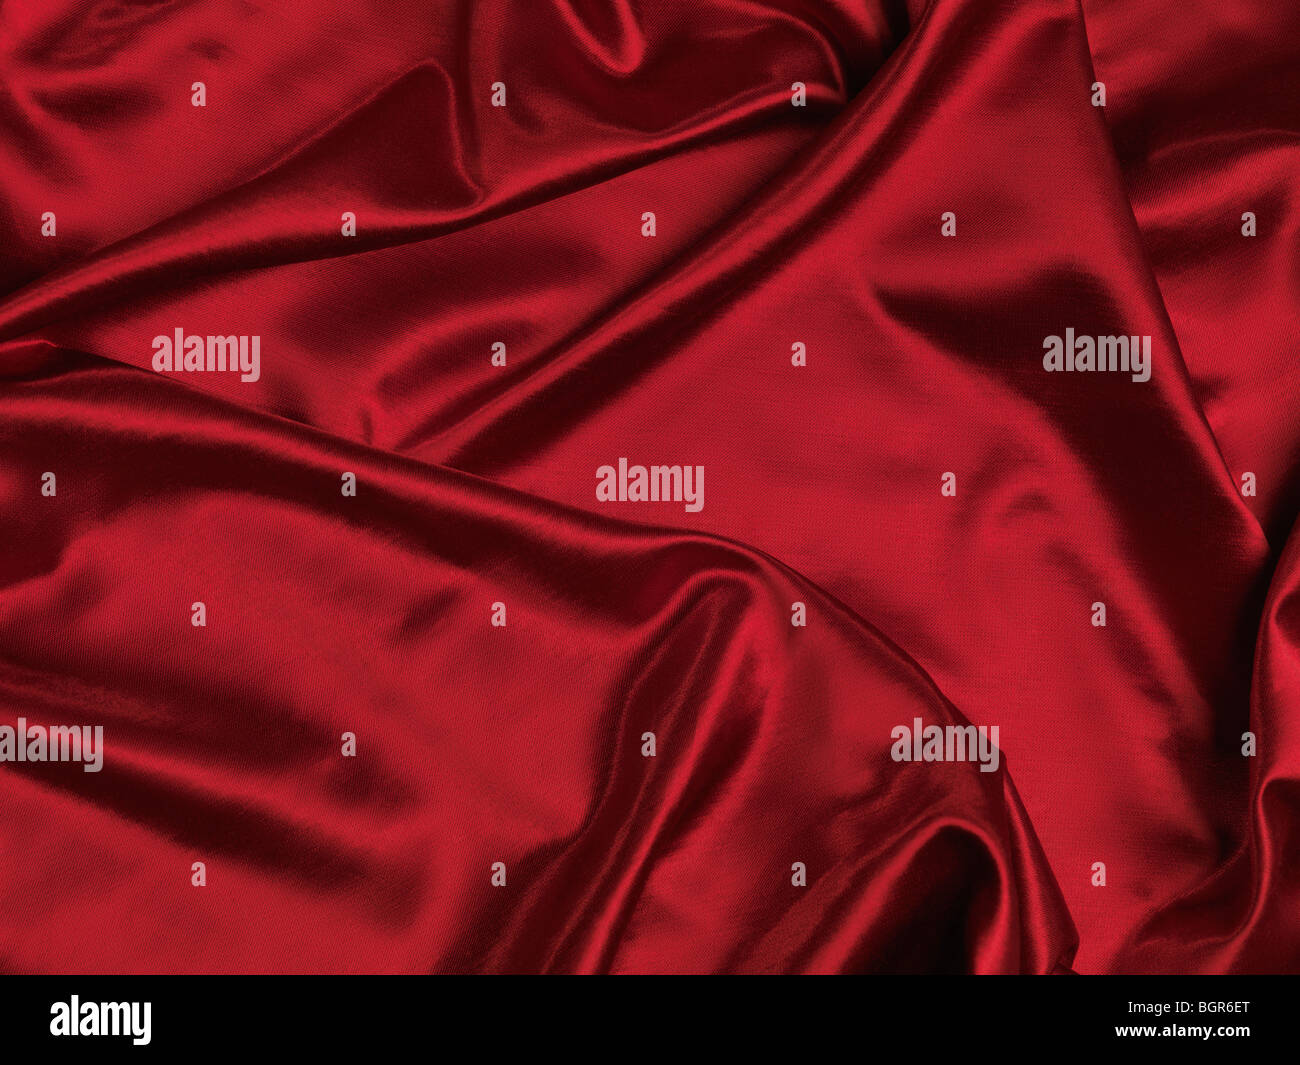 Red shiny silky fabric background Stock Photo